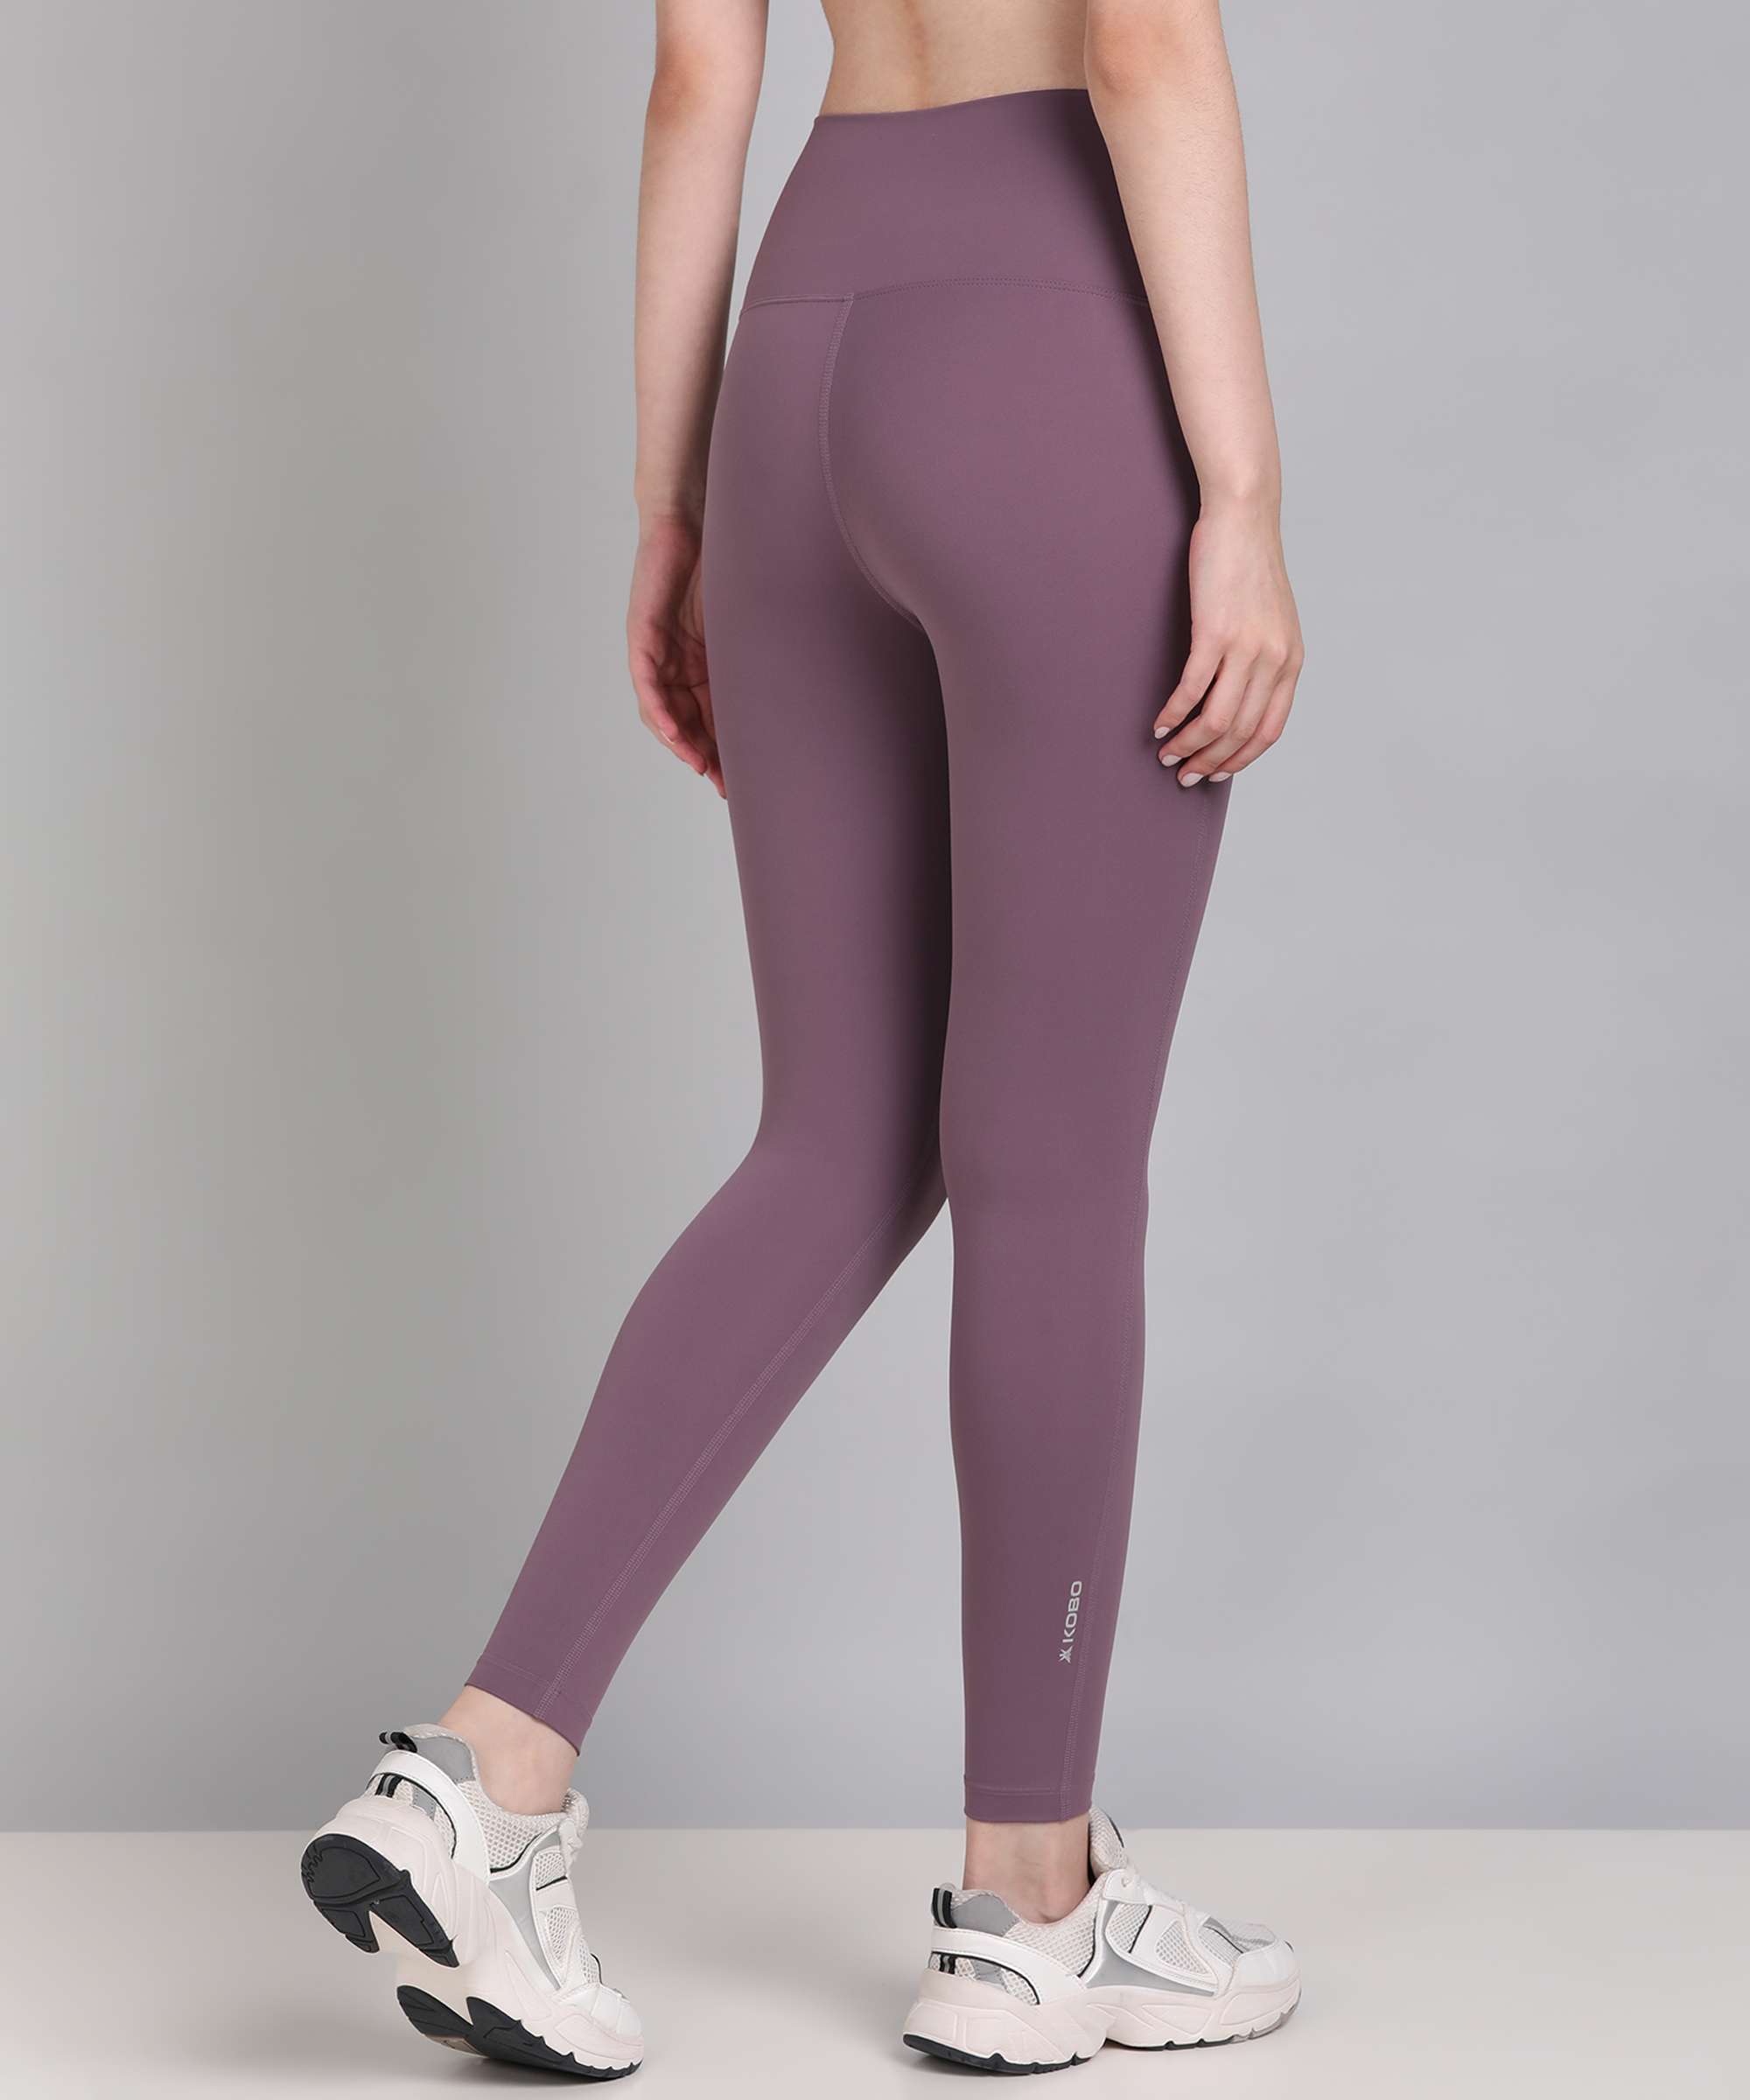 High Waist Running Tights - KOBO SPORTS Exclusively Designed For